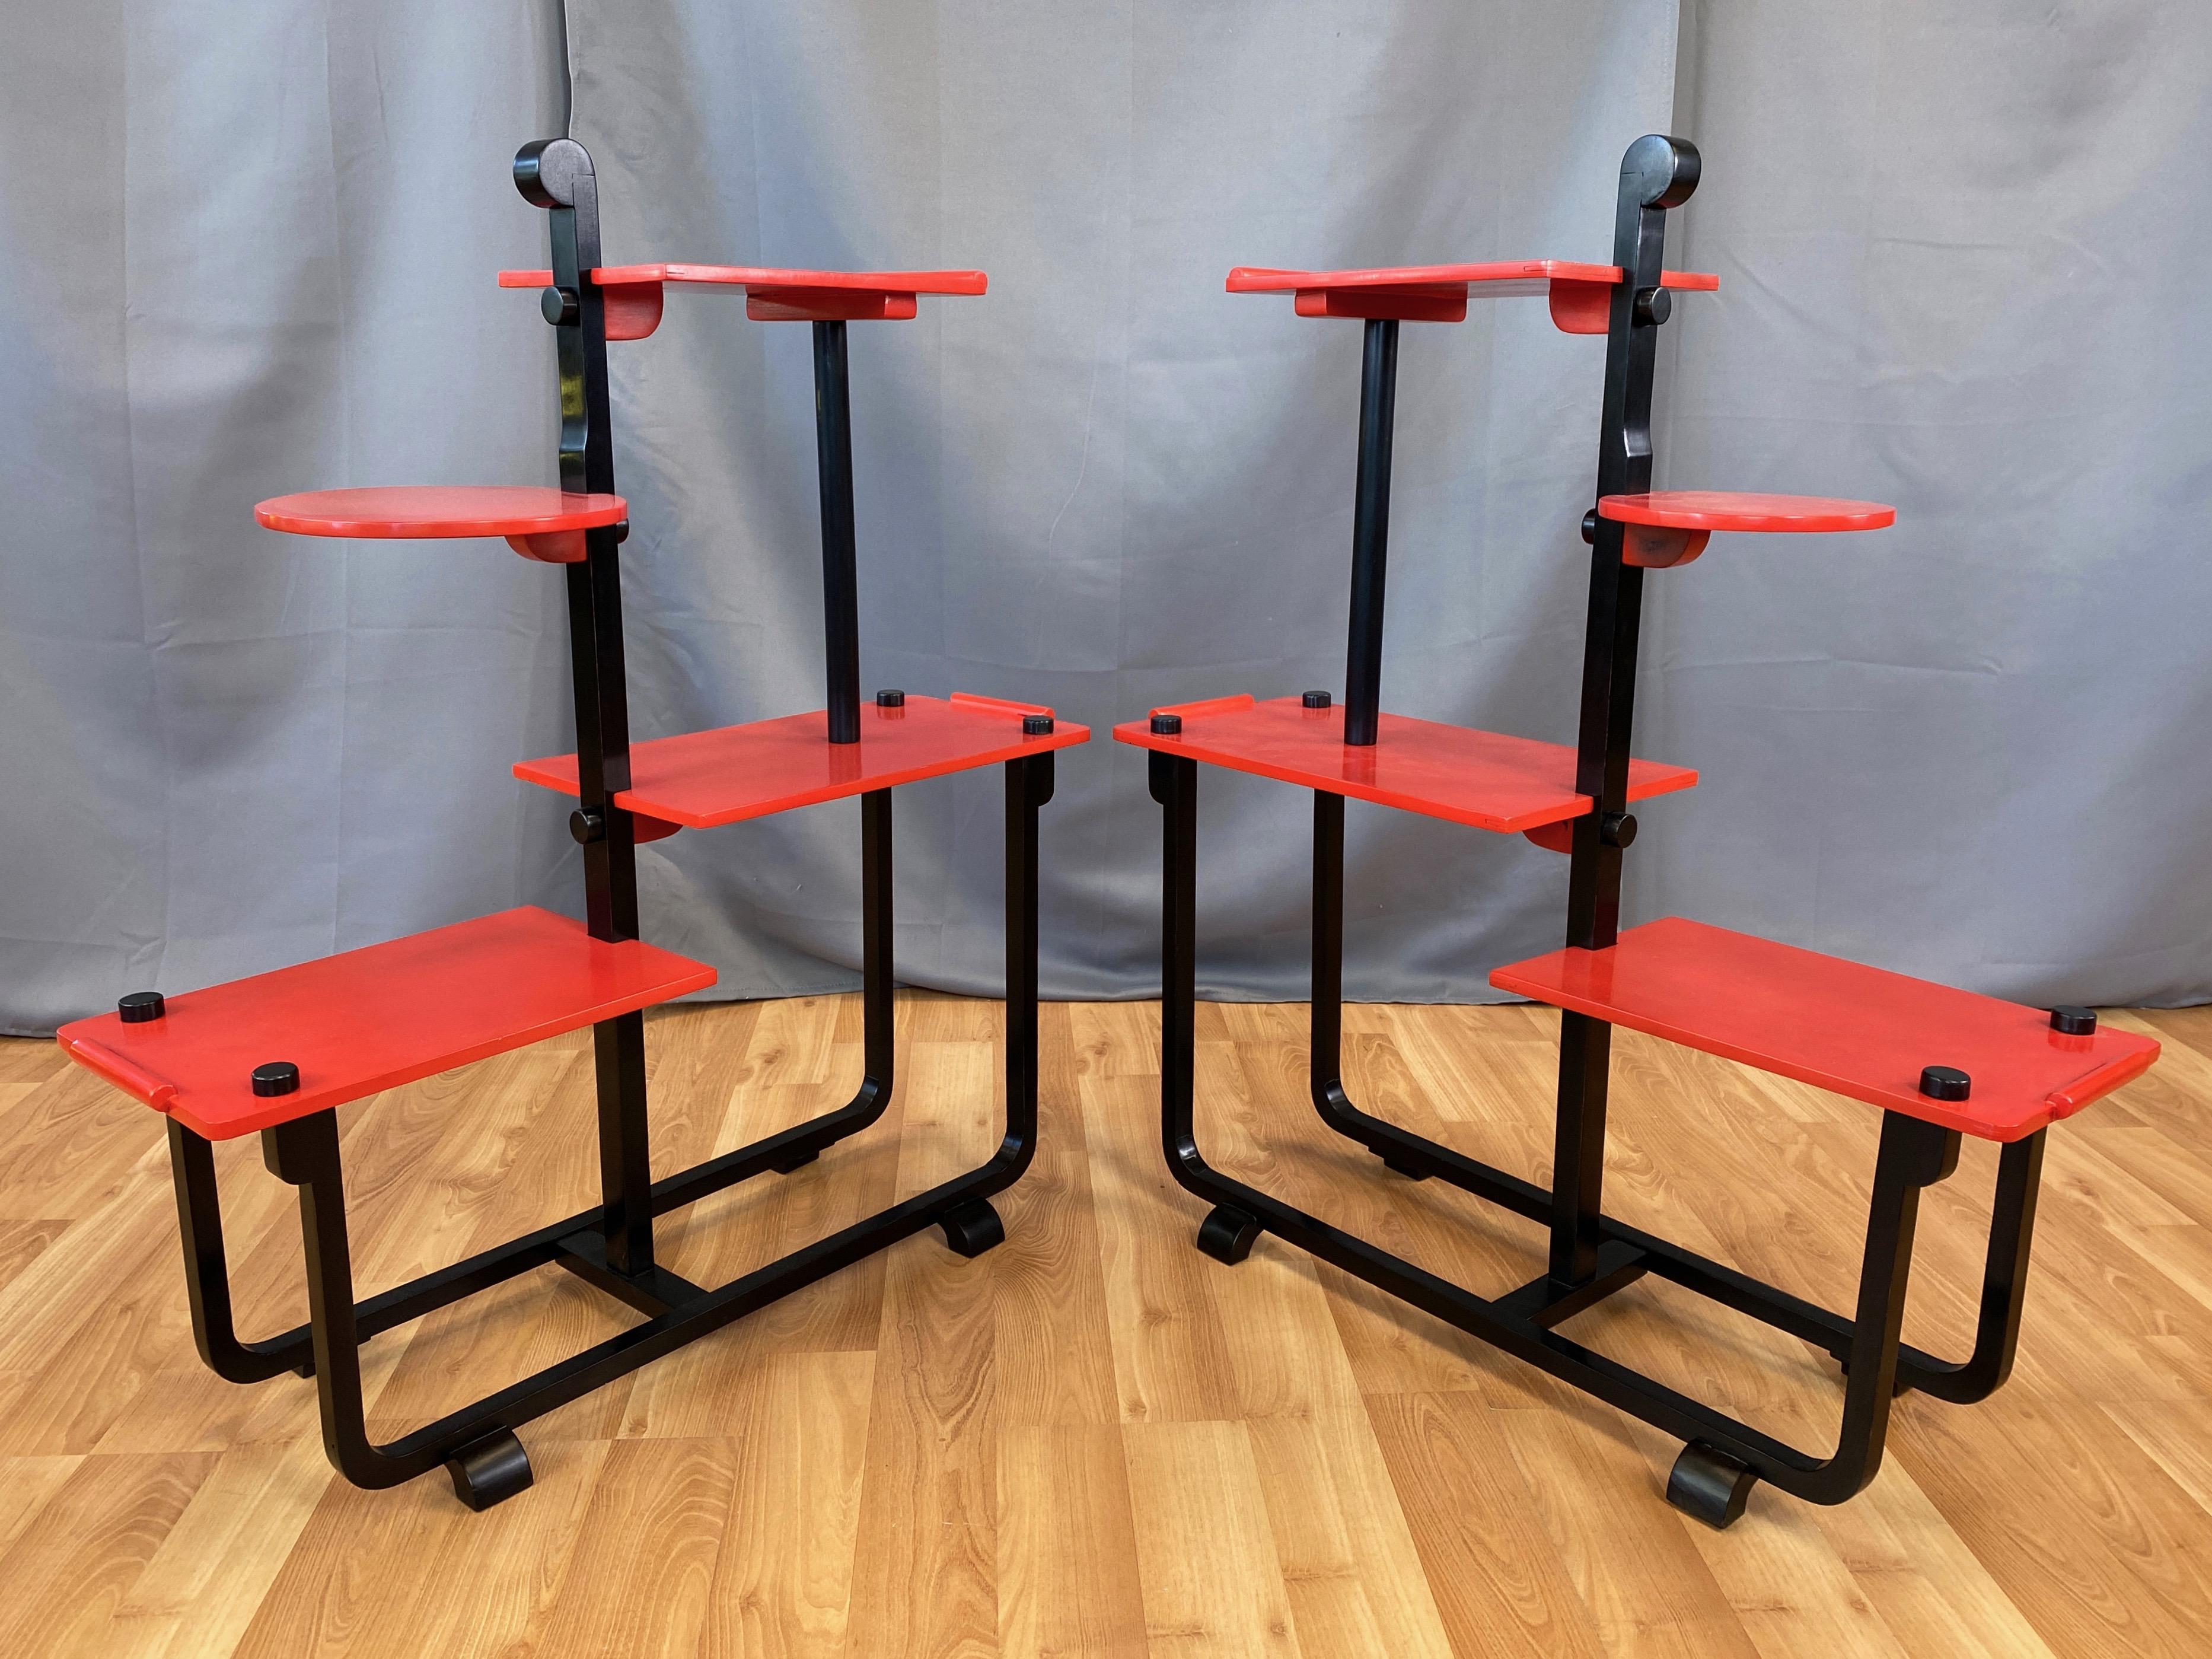 A very rare matched pair of eye-catching and exceptional 1930 red and black painted wood étagères by French decorator and furniture designer André Groult (b. 1884–1966), one of the most prominent figures of the Art Deco style.

Striking asymmetrical